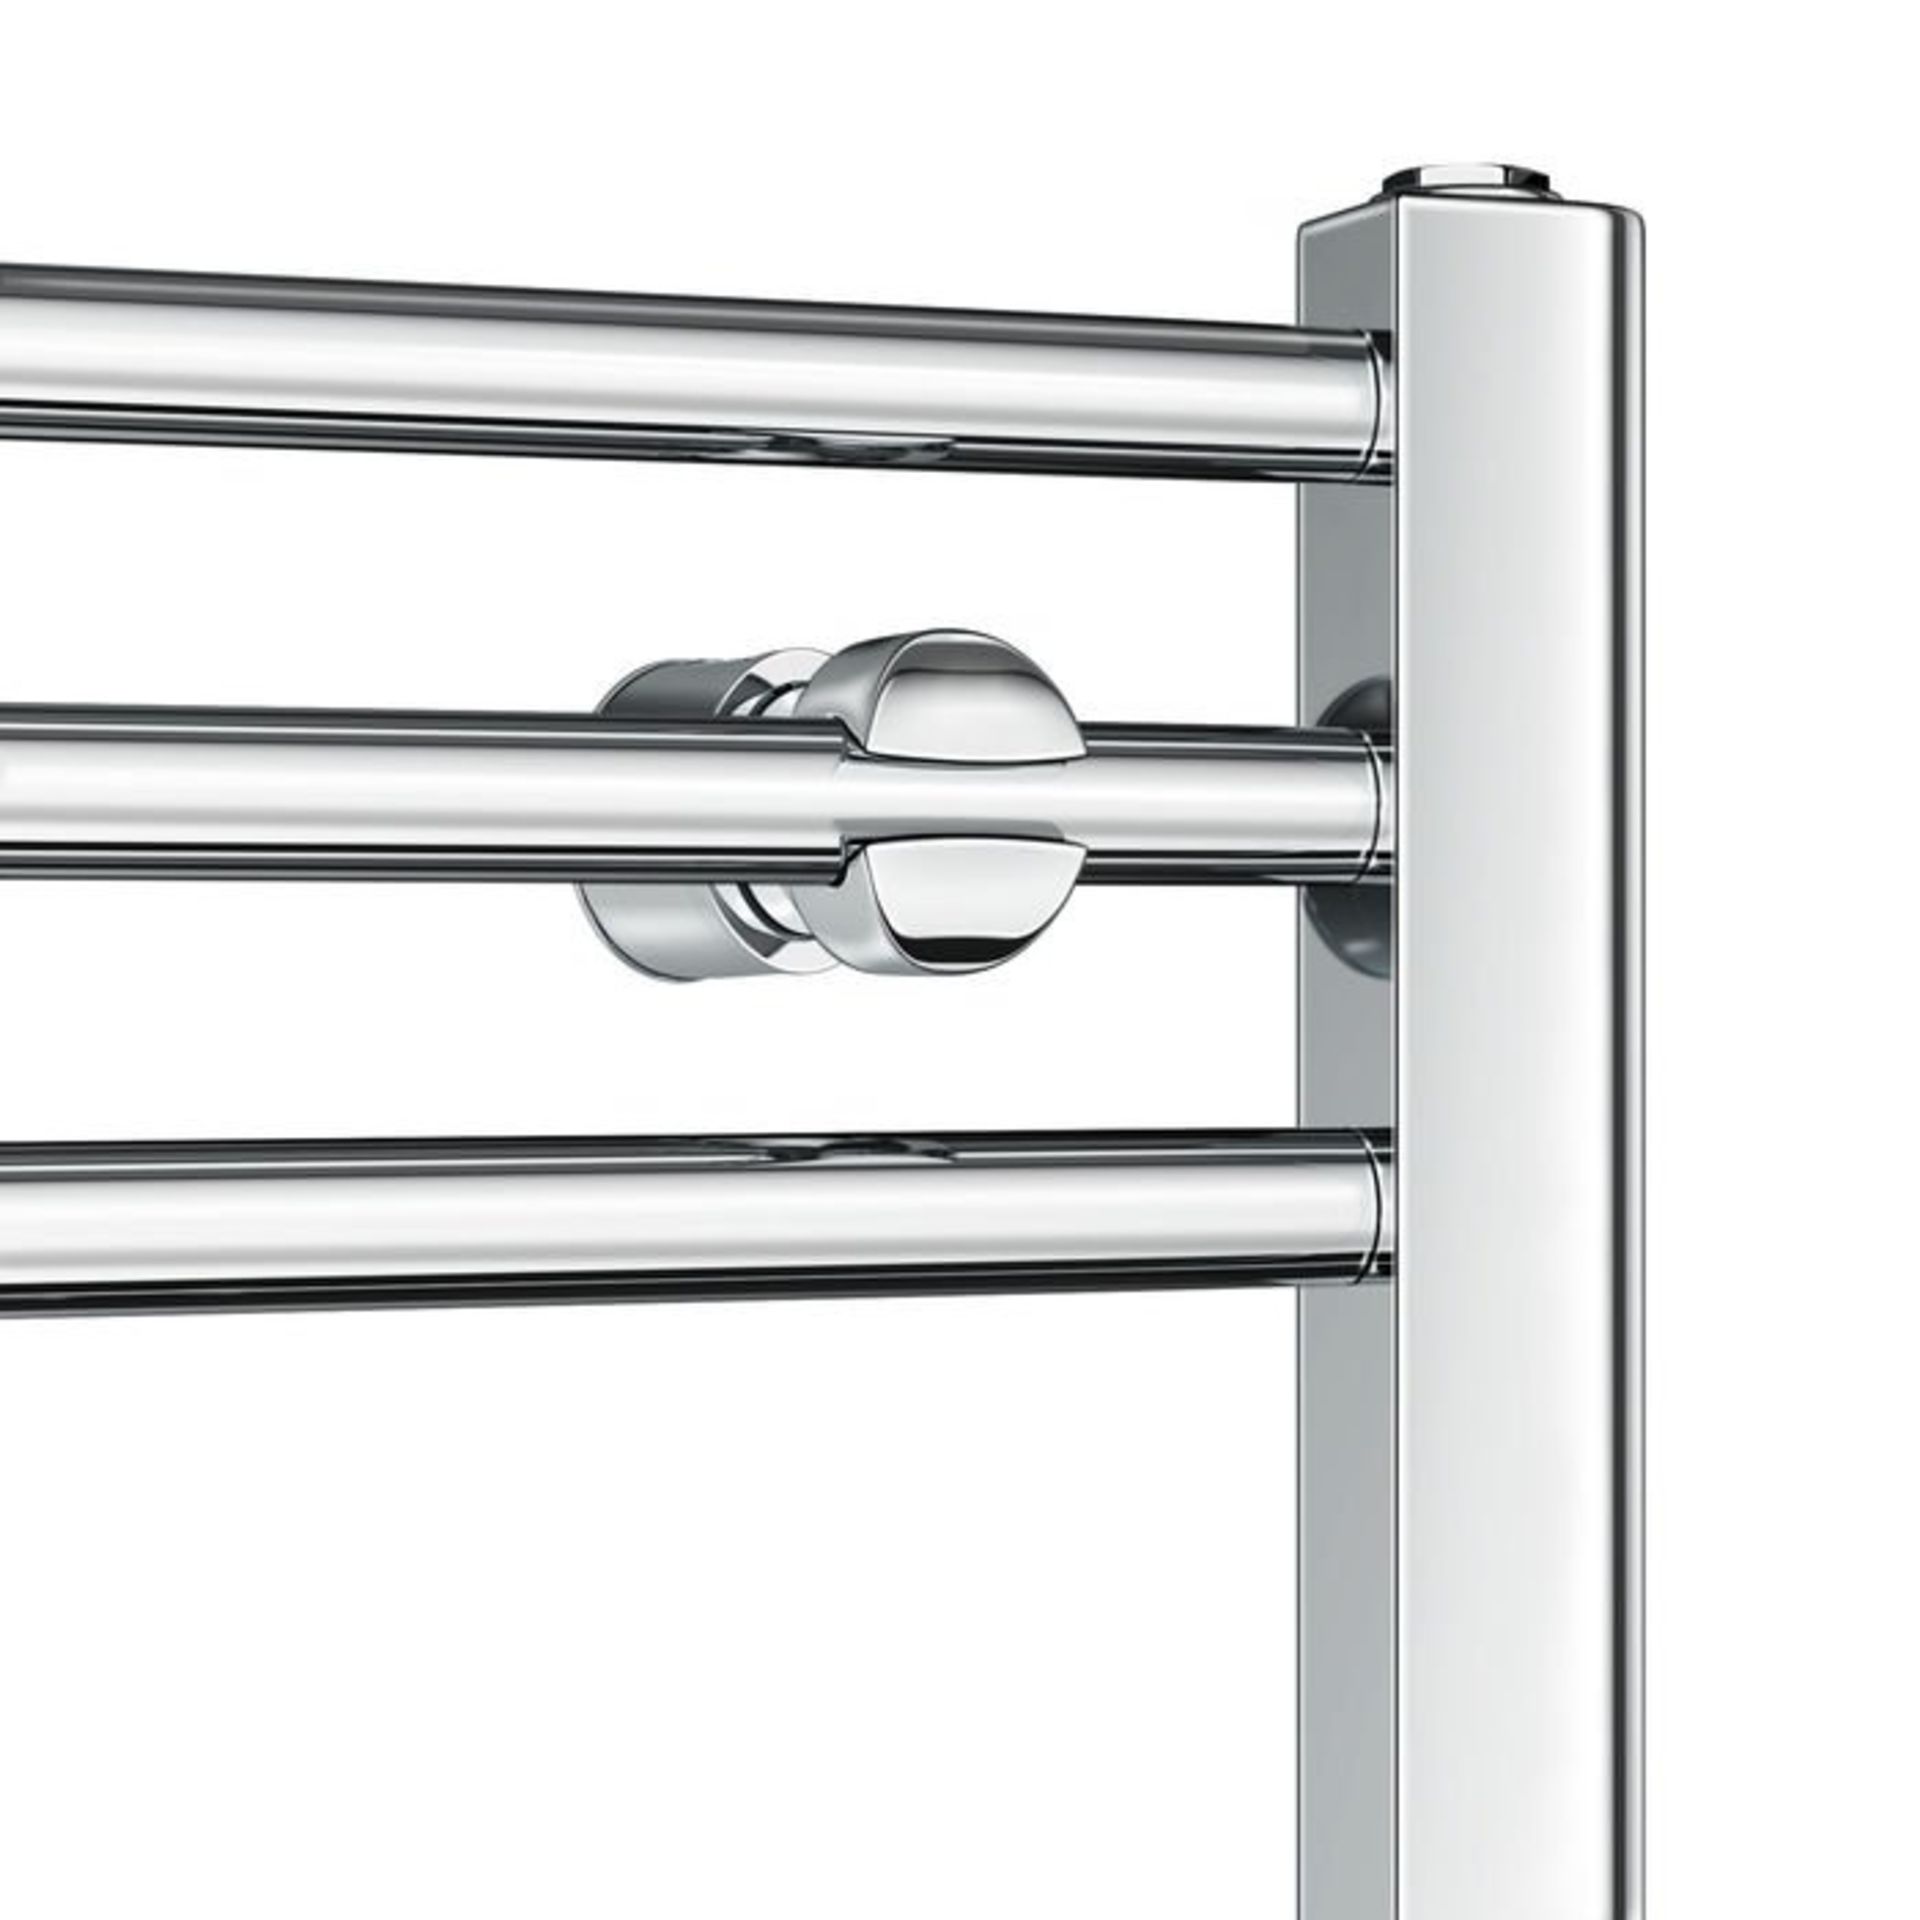 (G52) 800x300mm - 20mm Tubes - Chrome Heated Straight Rail Ladder Towel Rail Low carbon steel chrome - Image 4 of 4